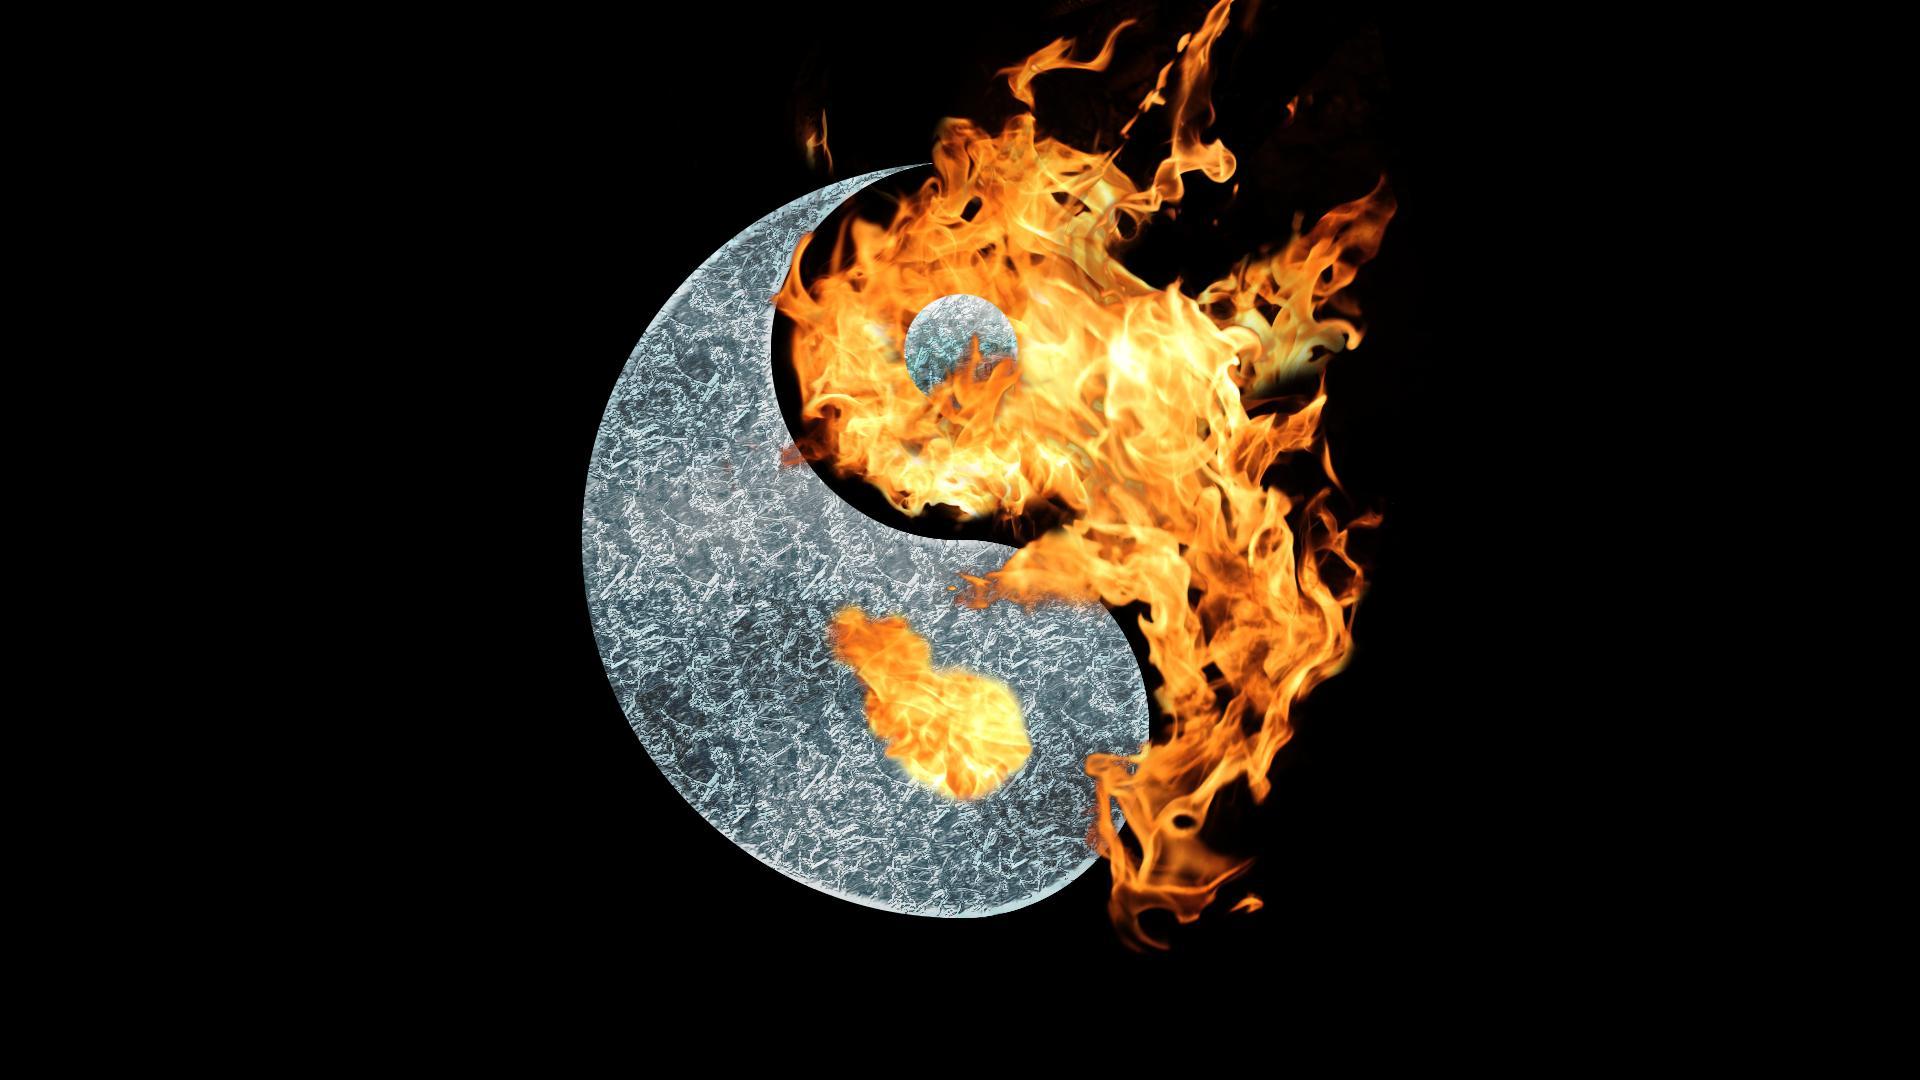 Yin Yang is a philosophical concept expressing the dualism of existence